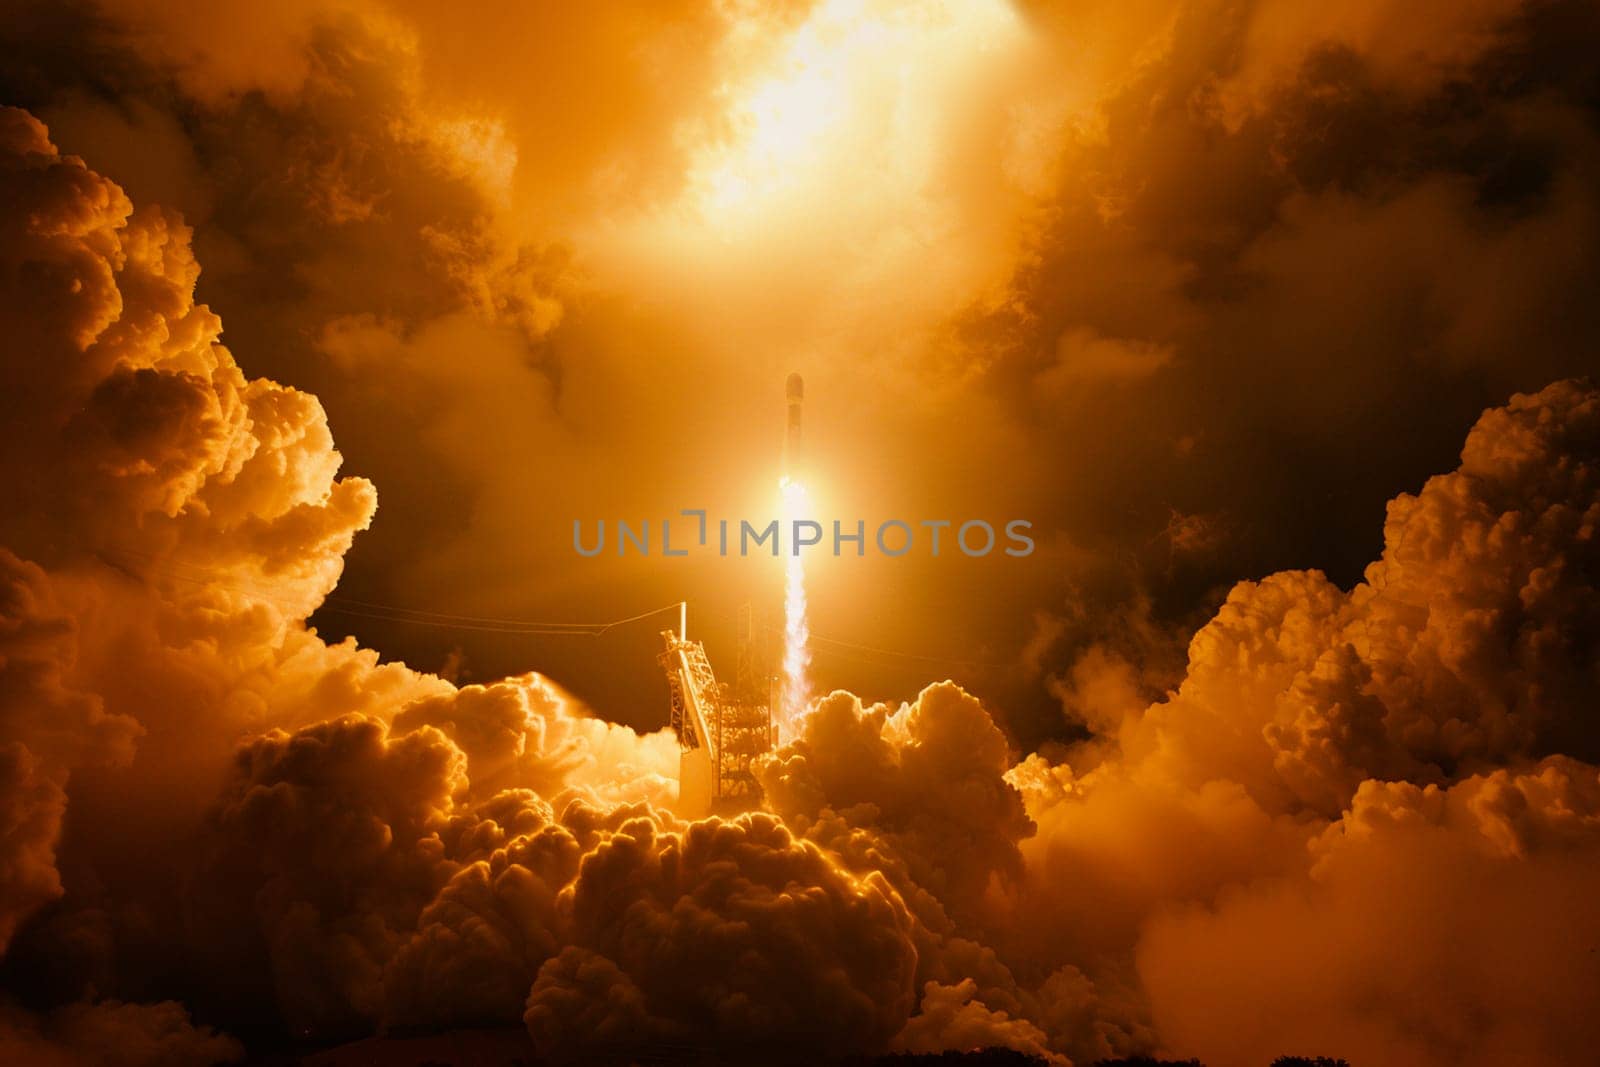 Captivating image of rocket launch with intense flames and smoke against dark sky. Dramatic space exploration concept with powerful rocket ignition, creating billowing clouds and fierce light.